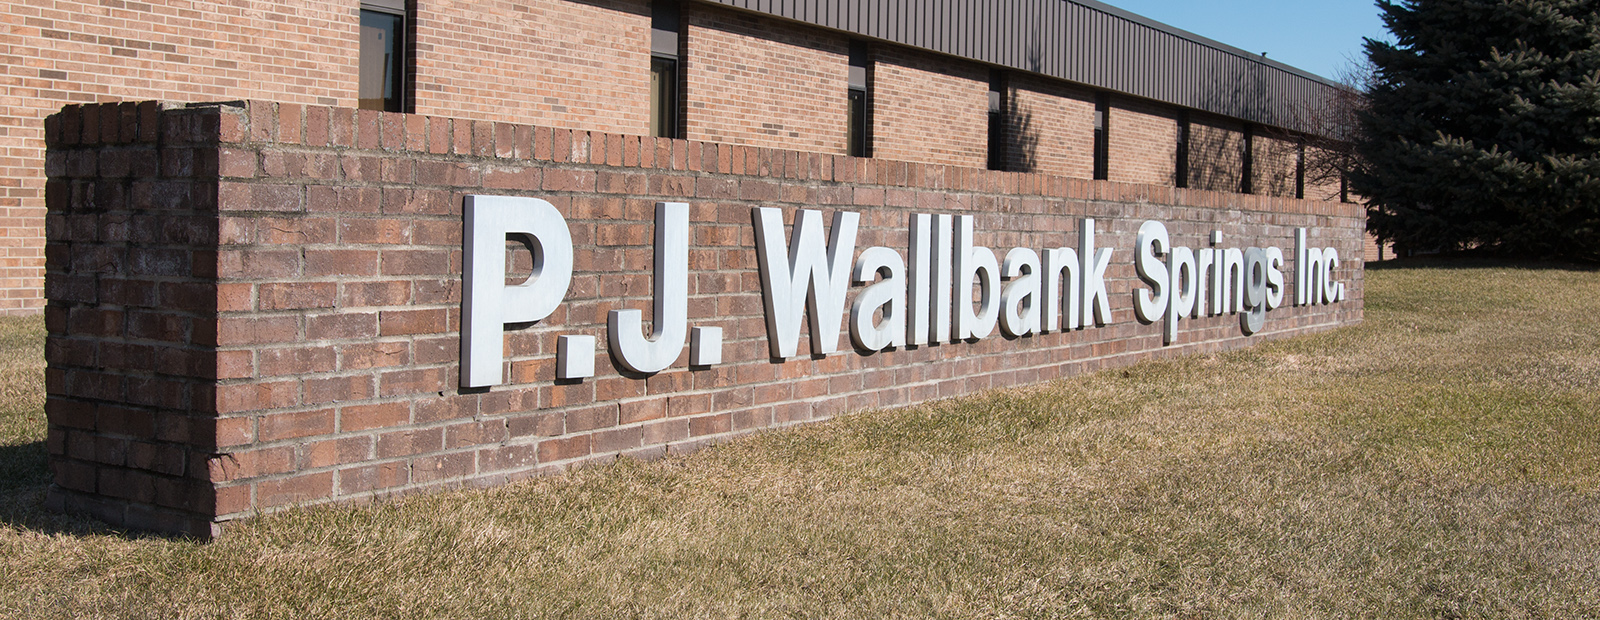 PJ Wallbank Springs is boosting its investment in Port Huron.